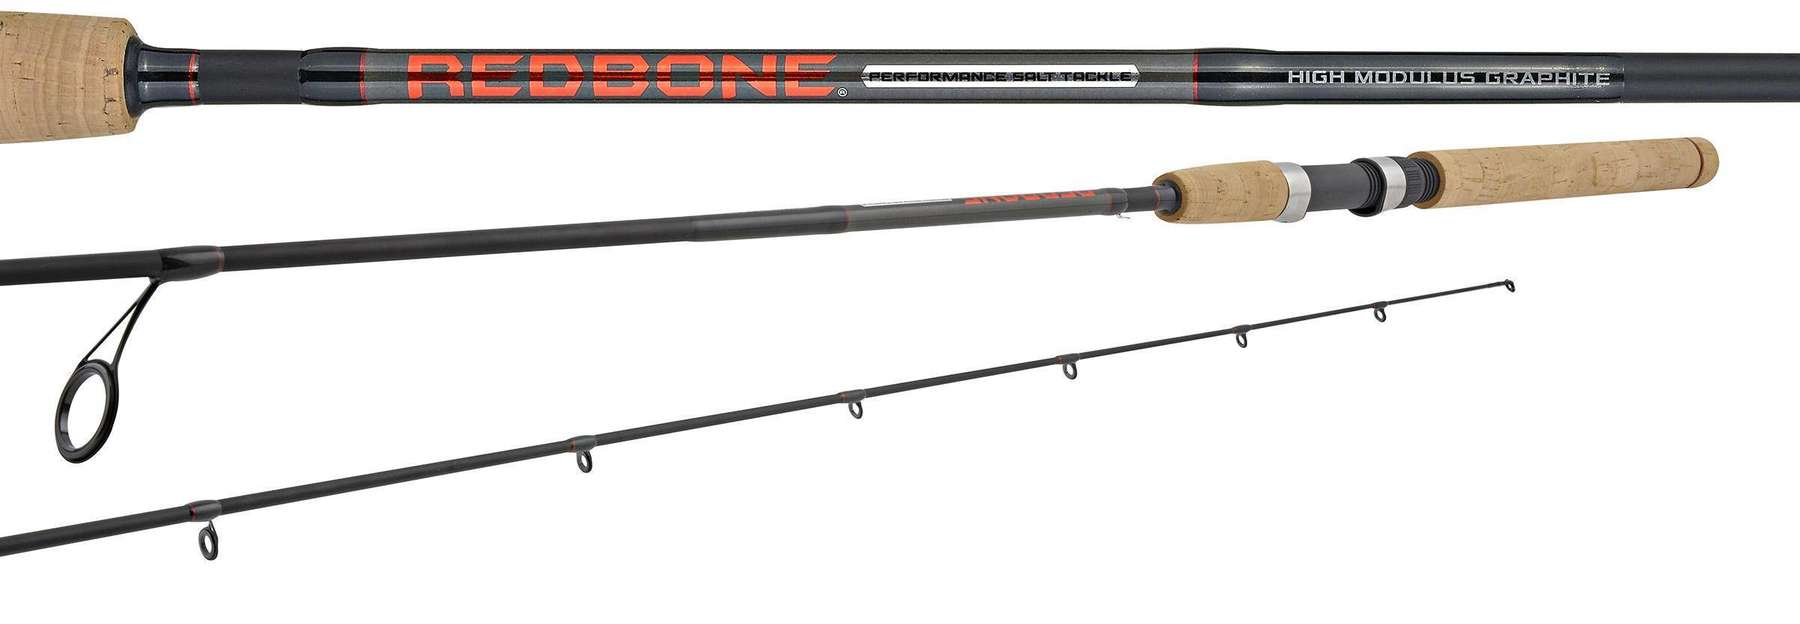 Hurricane Redbone 7' 1 Piece Medium Spin Rod 8-17 Pounds - Ideal For Fishing  at Outdoor Shopping